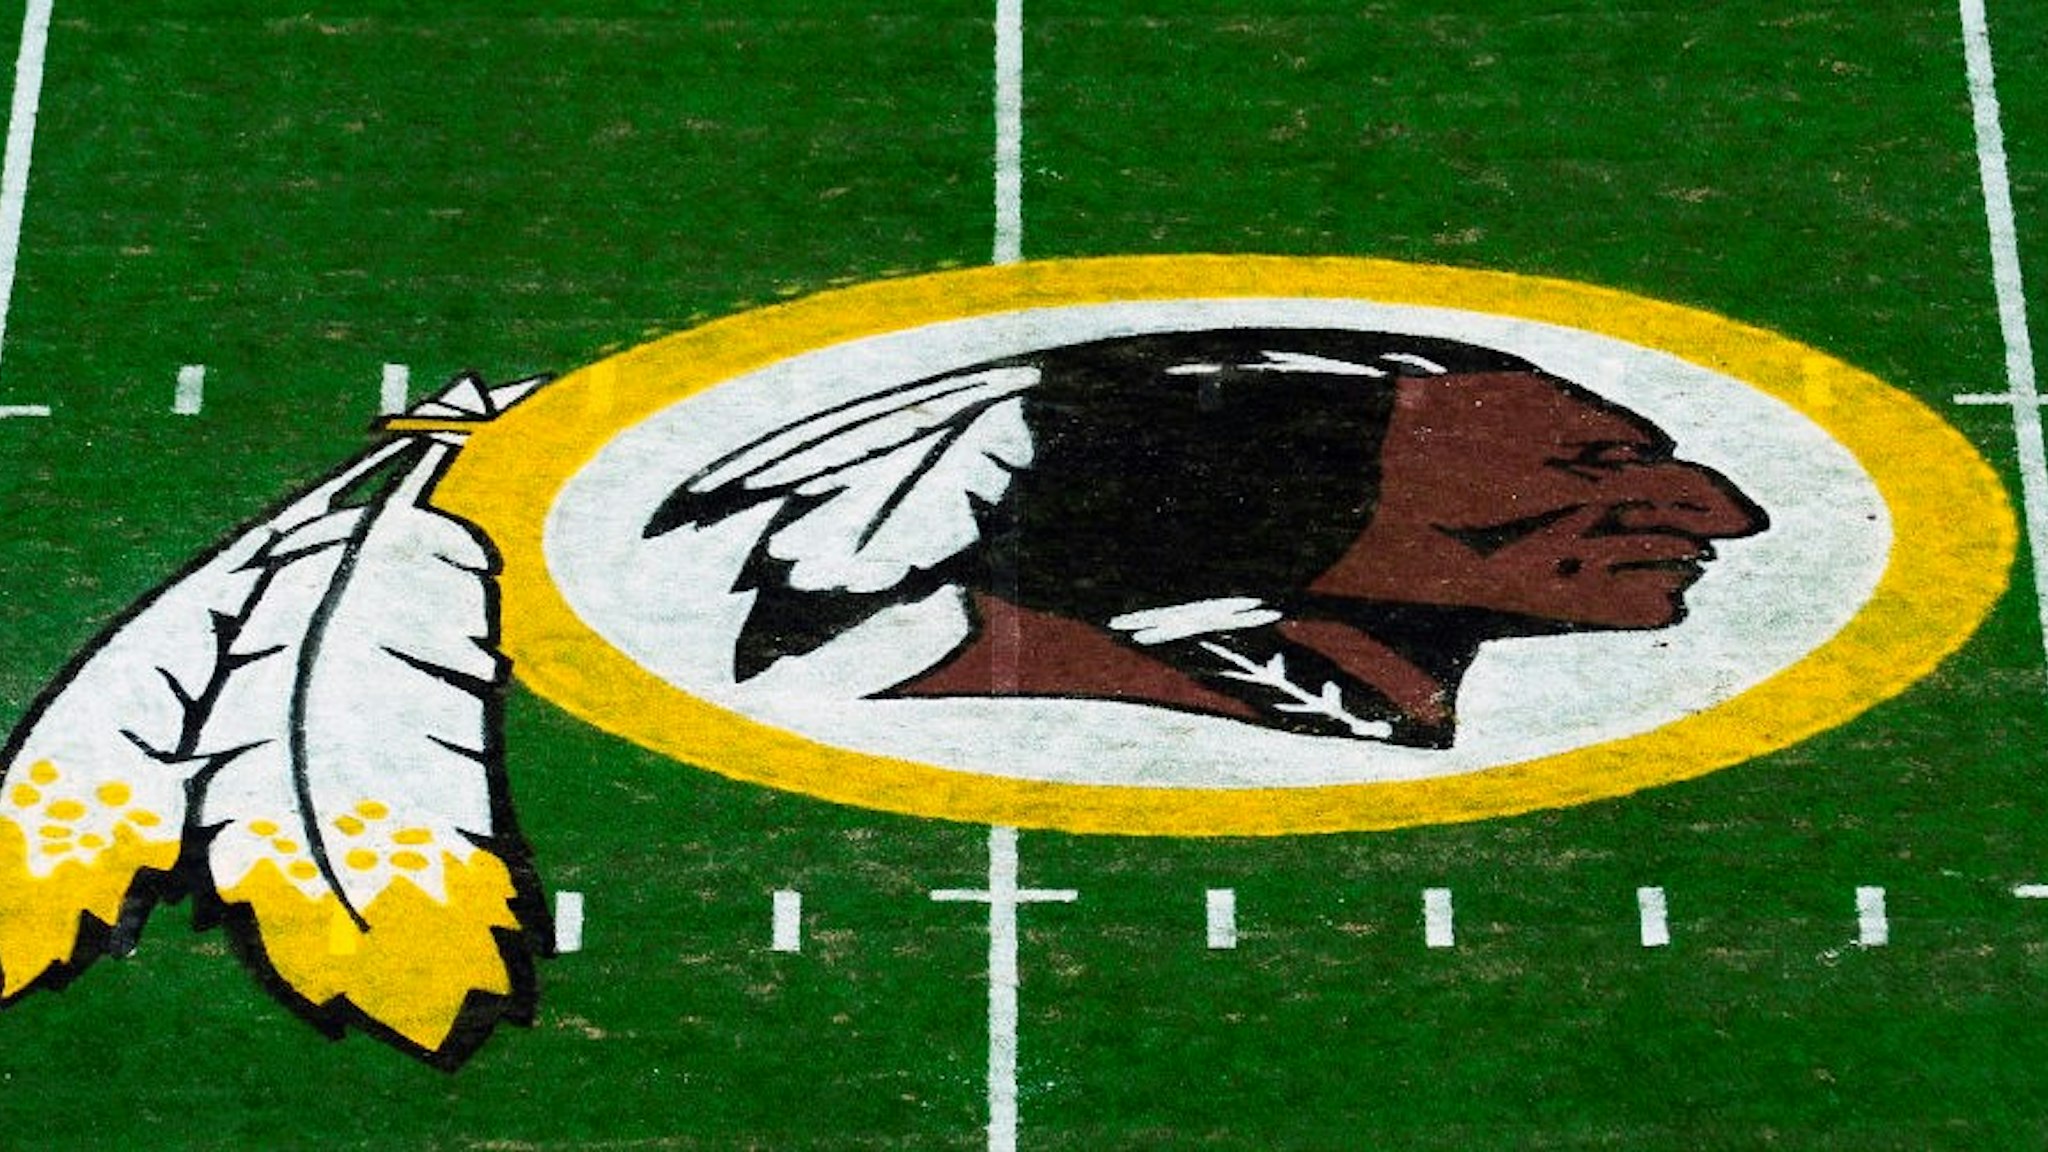 LANDOVER, MD - NOVEMBER 24: A general view of the Washington Redskins logo at center field before a game between the Detroit Lions and Redskins at FedExField on November 24, 2019 in Landover, Maryland. (Photo by